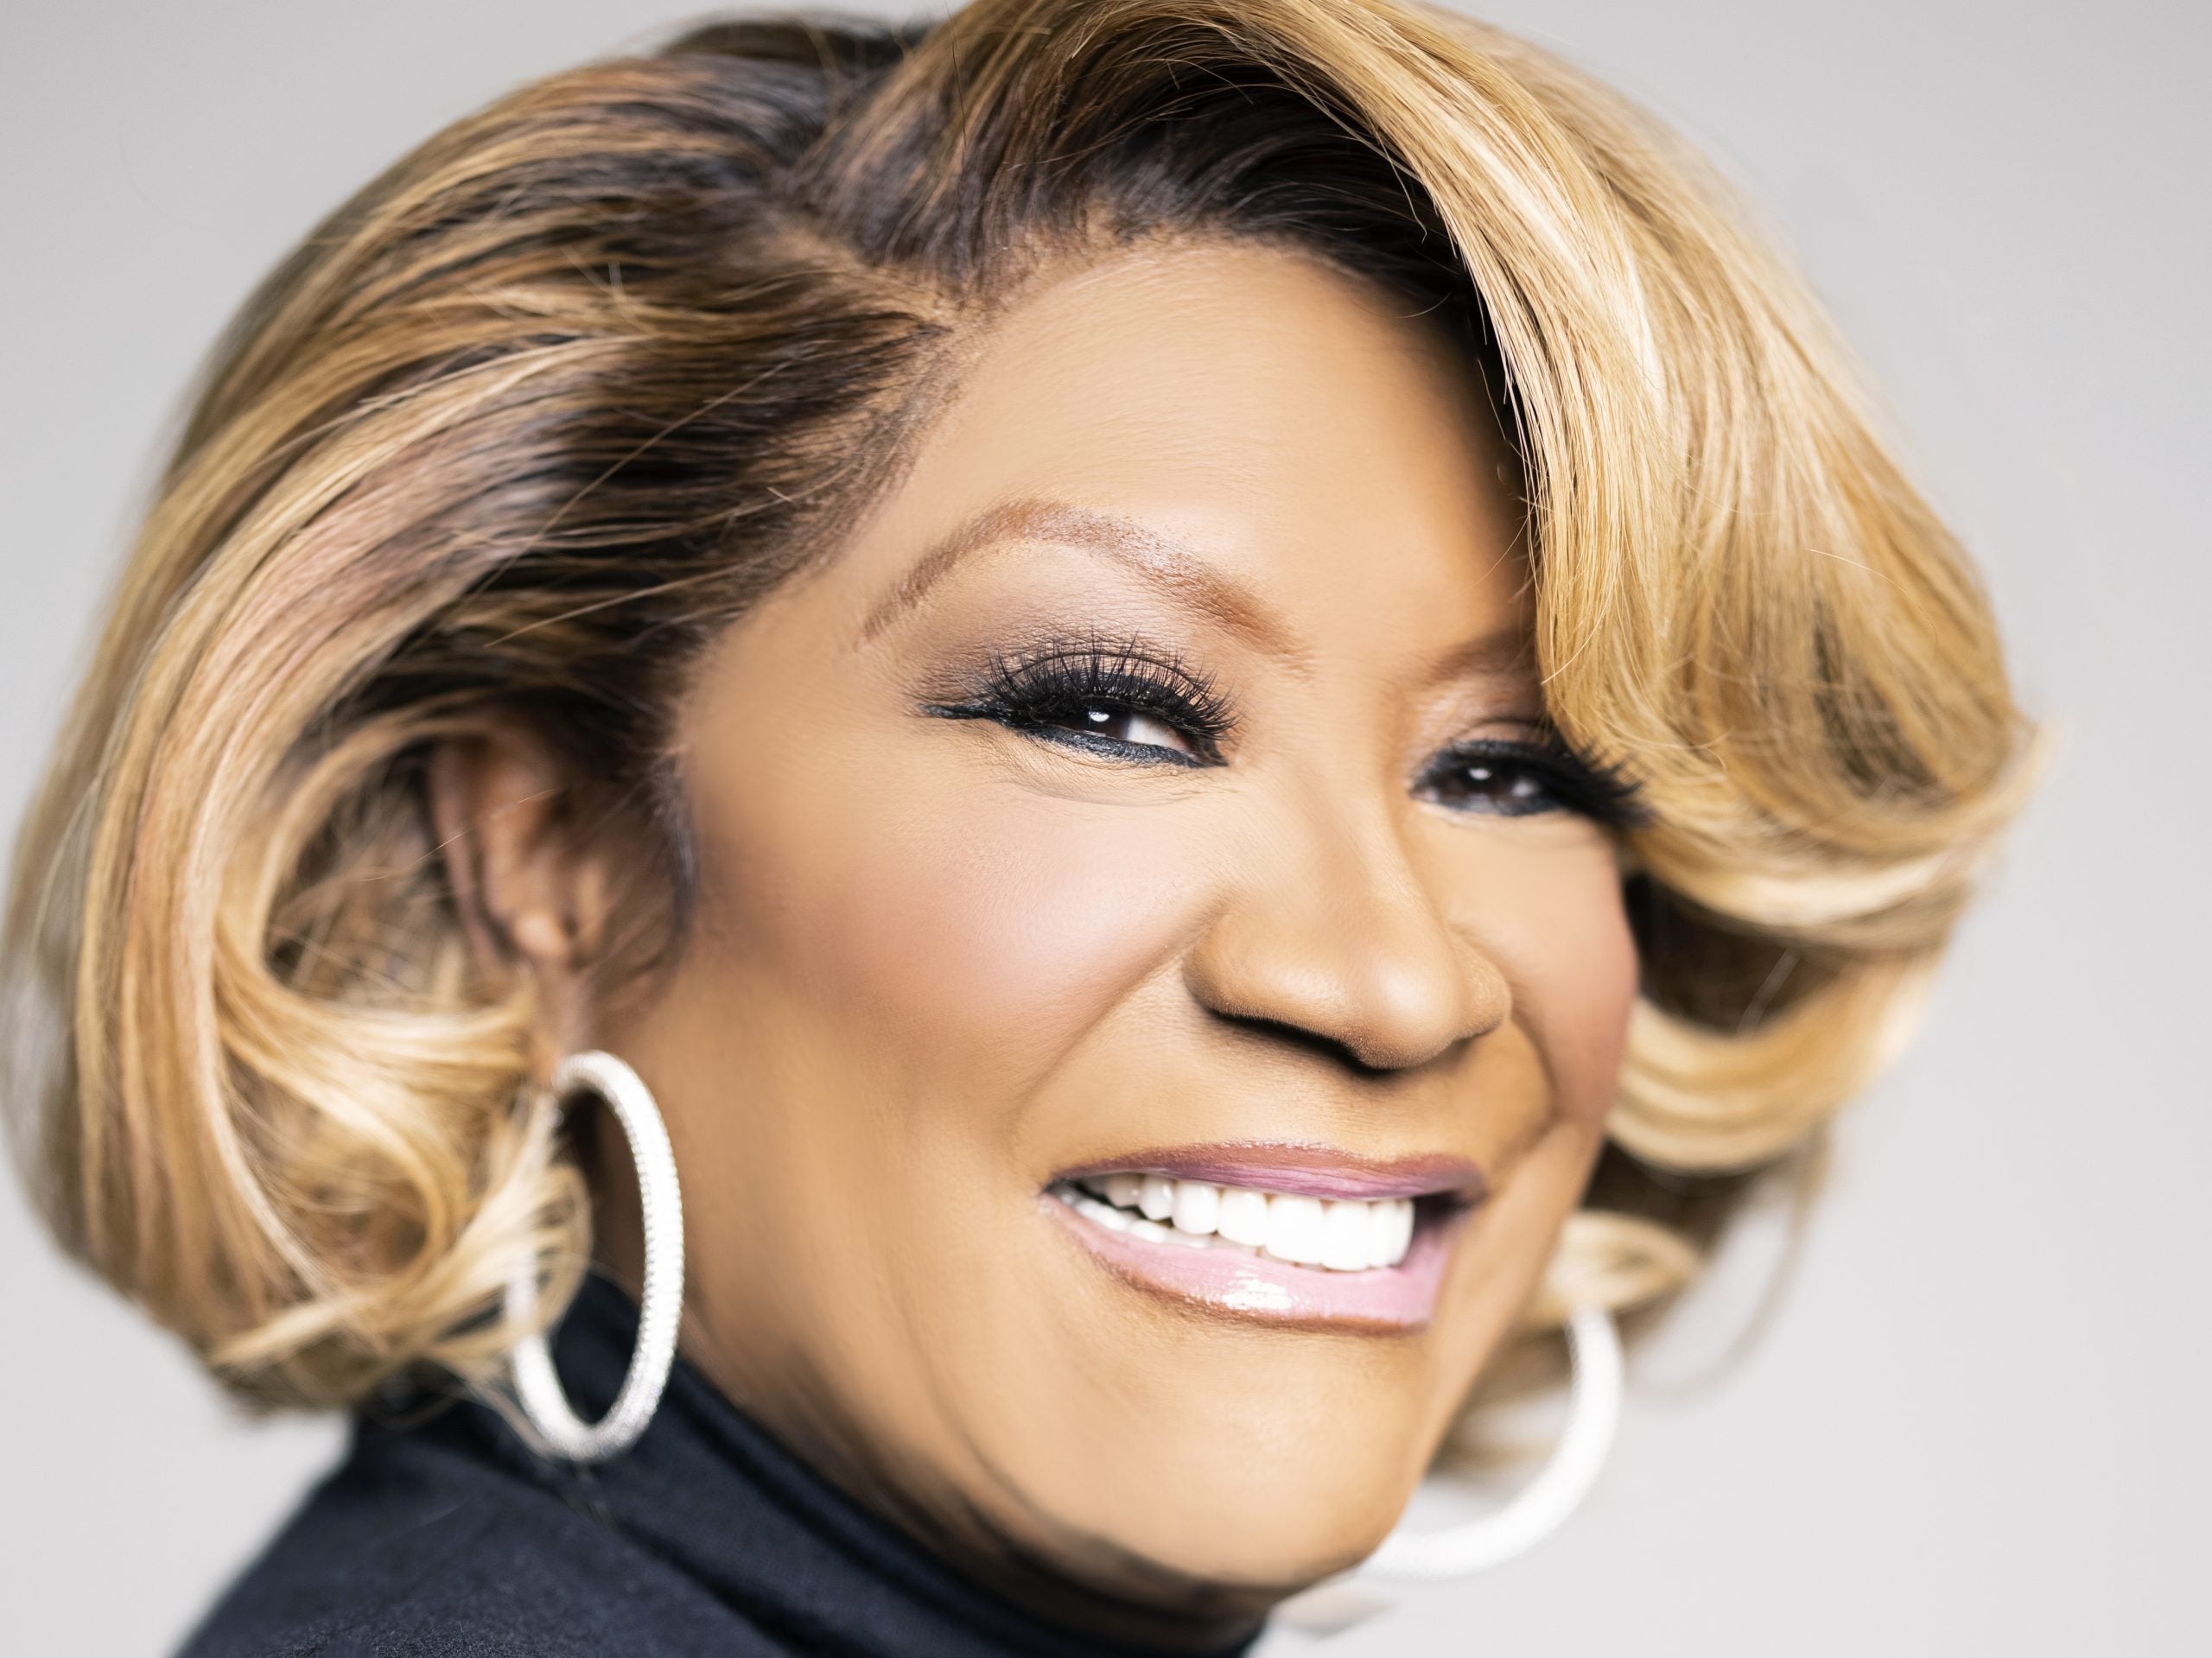 Patti LaBelle Will Be Honored At CMT 'Smashing Glass: A Celebration Of The Groundbreaking Women Of Music'